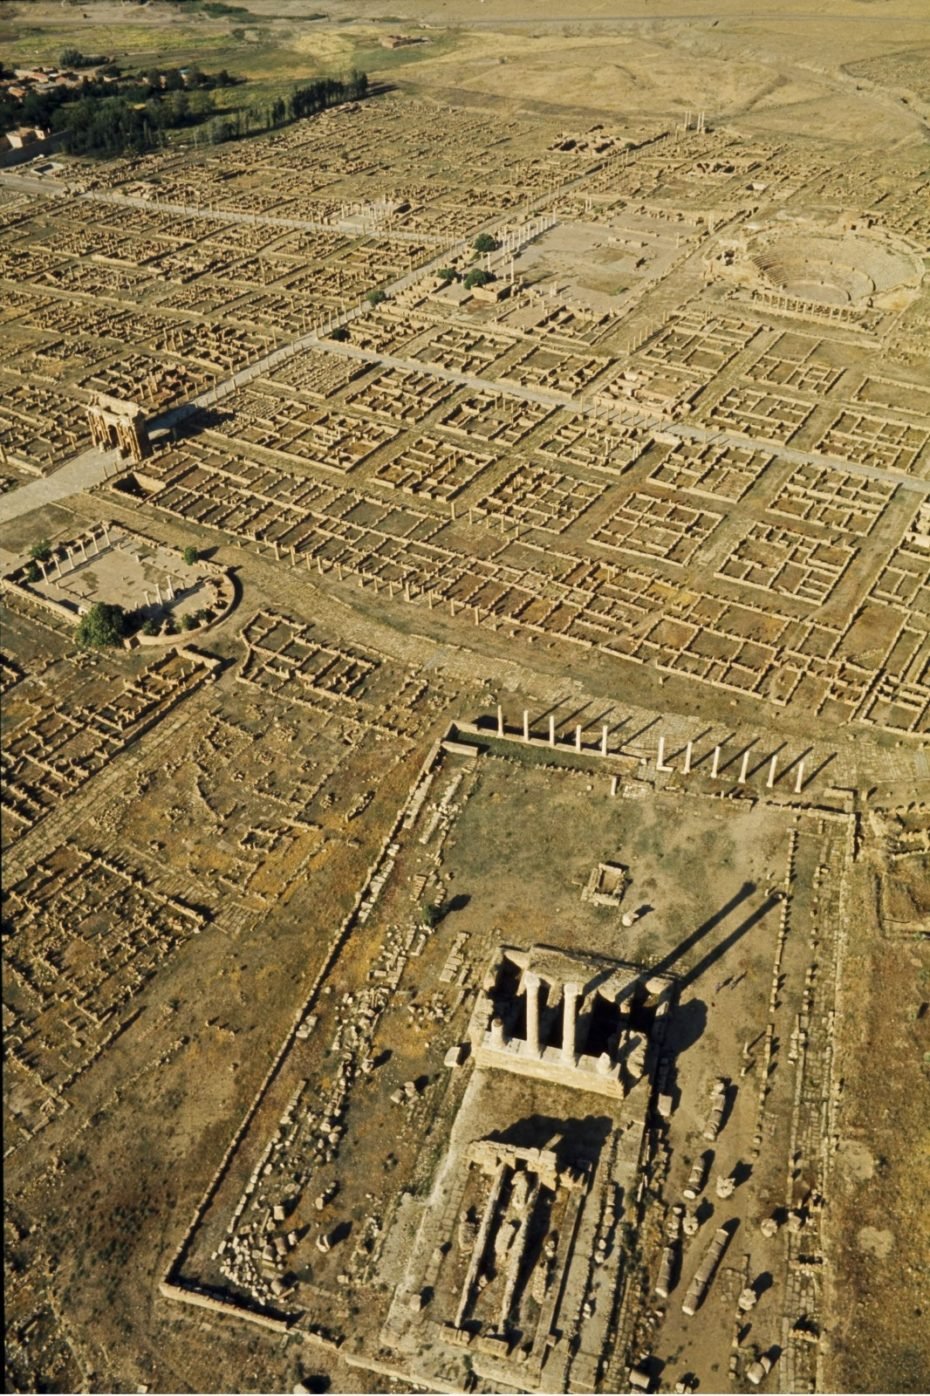 Buried In The Sand For A Millennium: Africa's Roman Ghost City - AMZ Newspaper